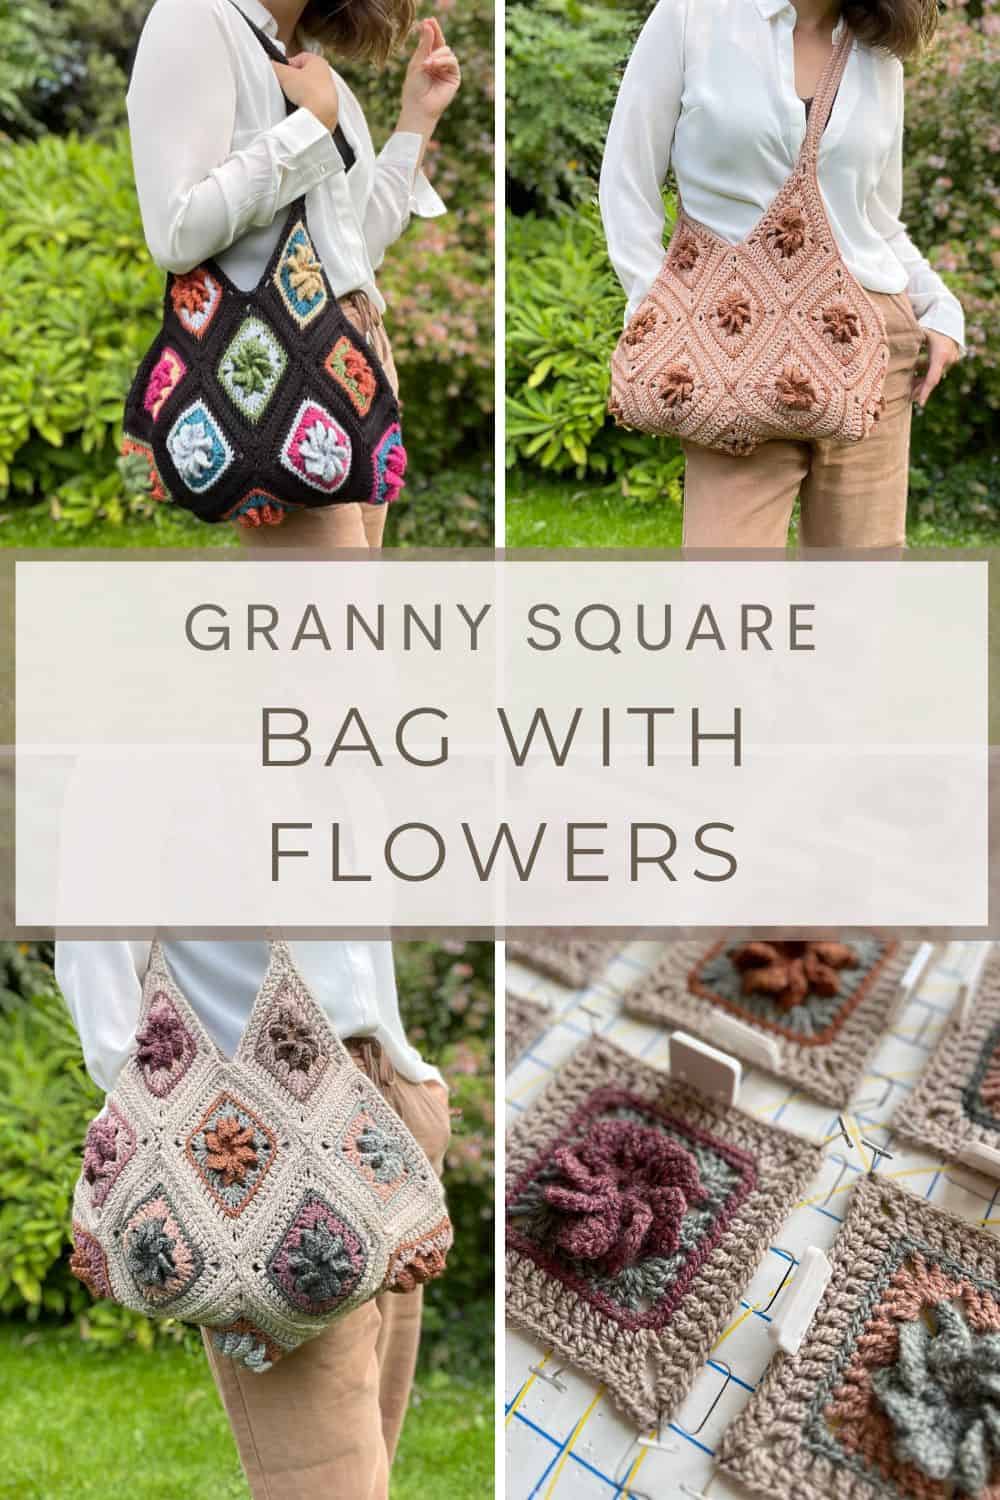 Granny square bag with flowers.